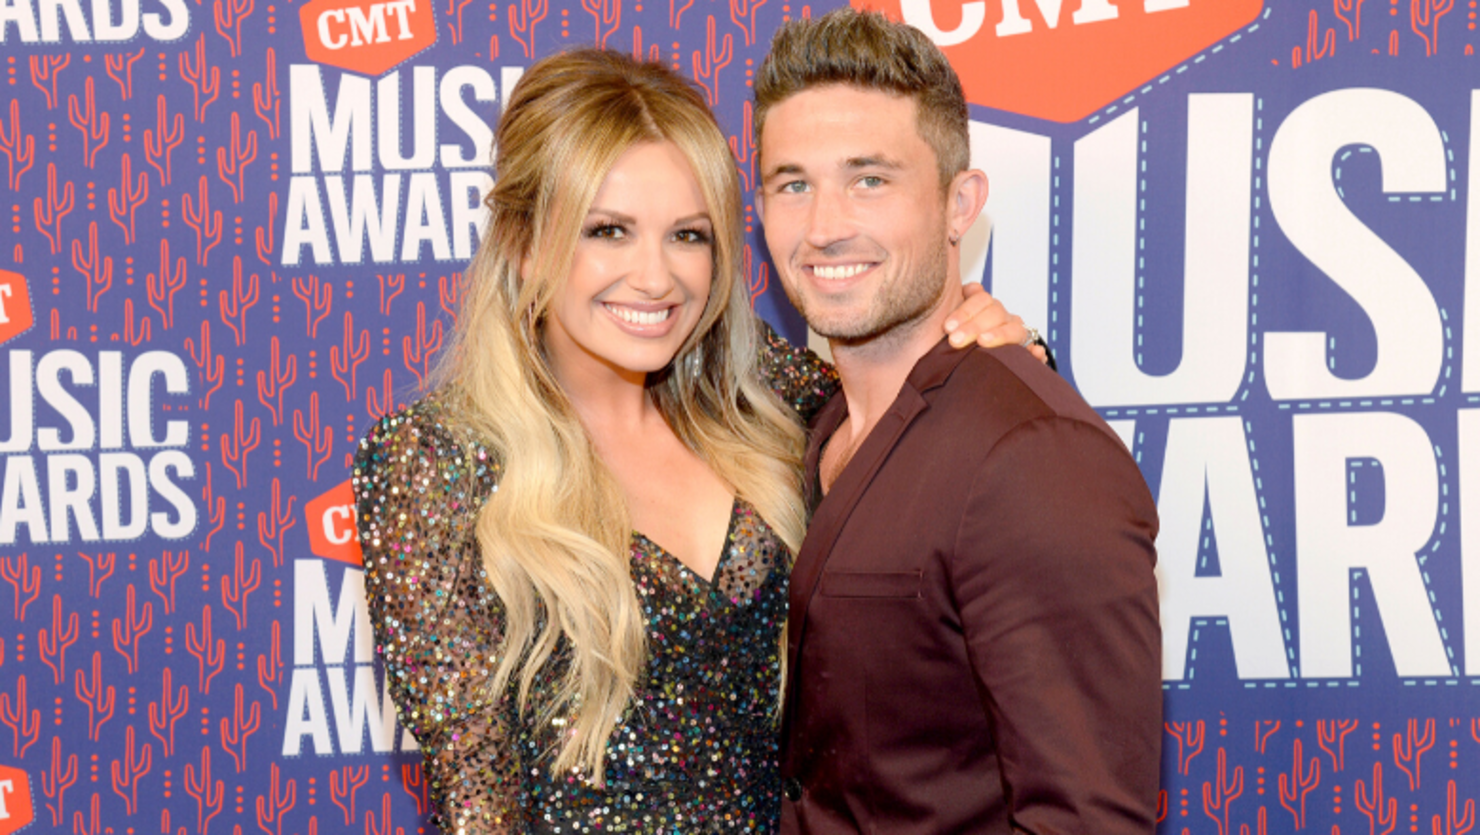 Carly Pearce And Michael Ray Share Sweet Duet, 'Finish Your Sentences'